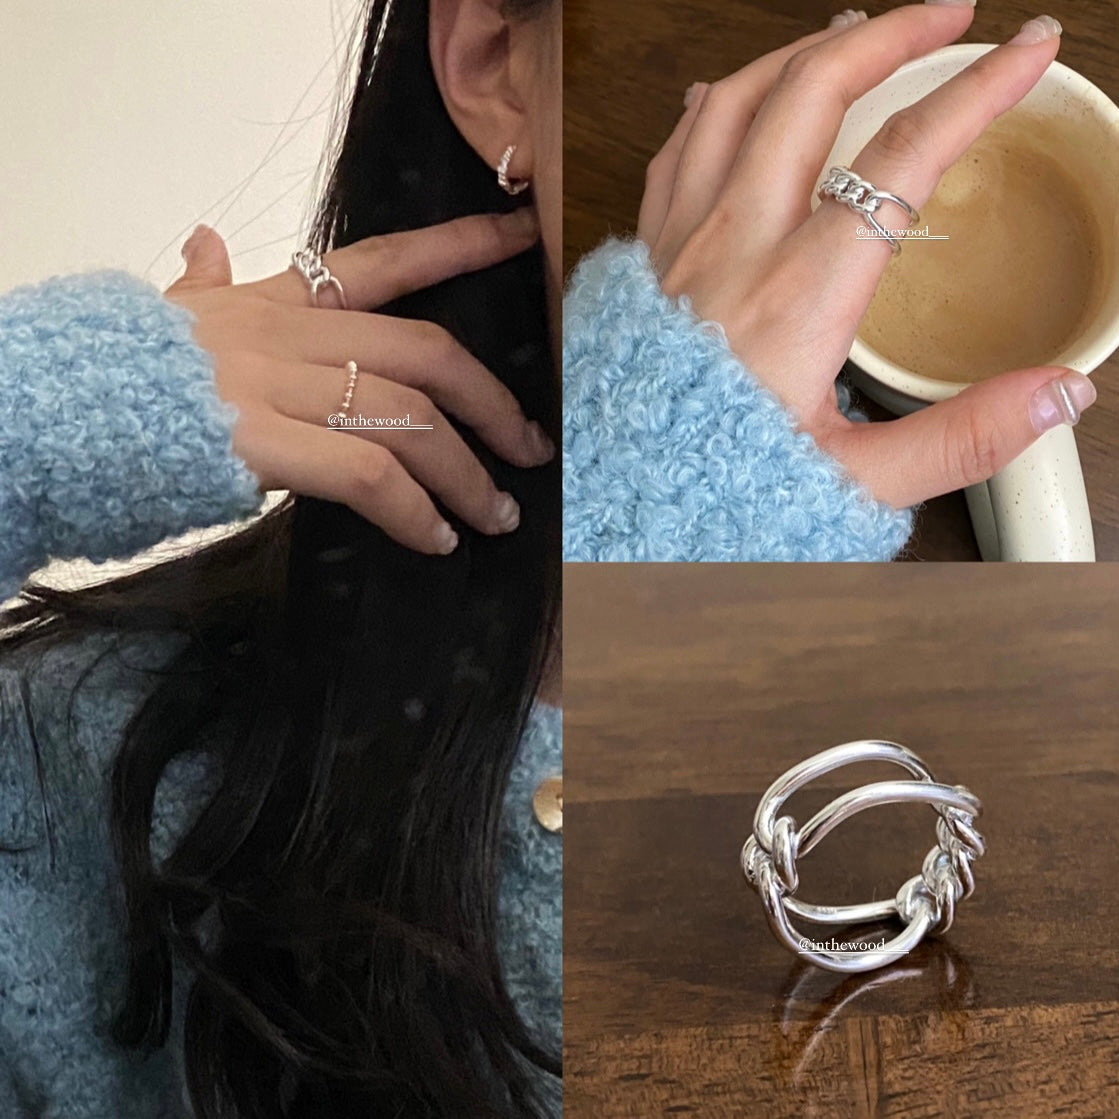 [925silver] Knit Ring